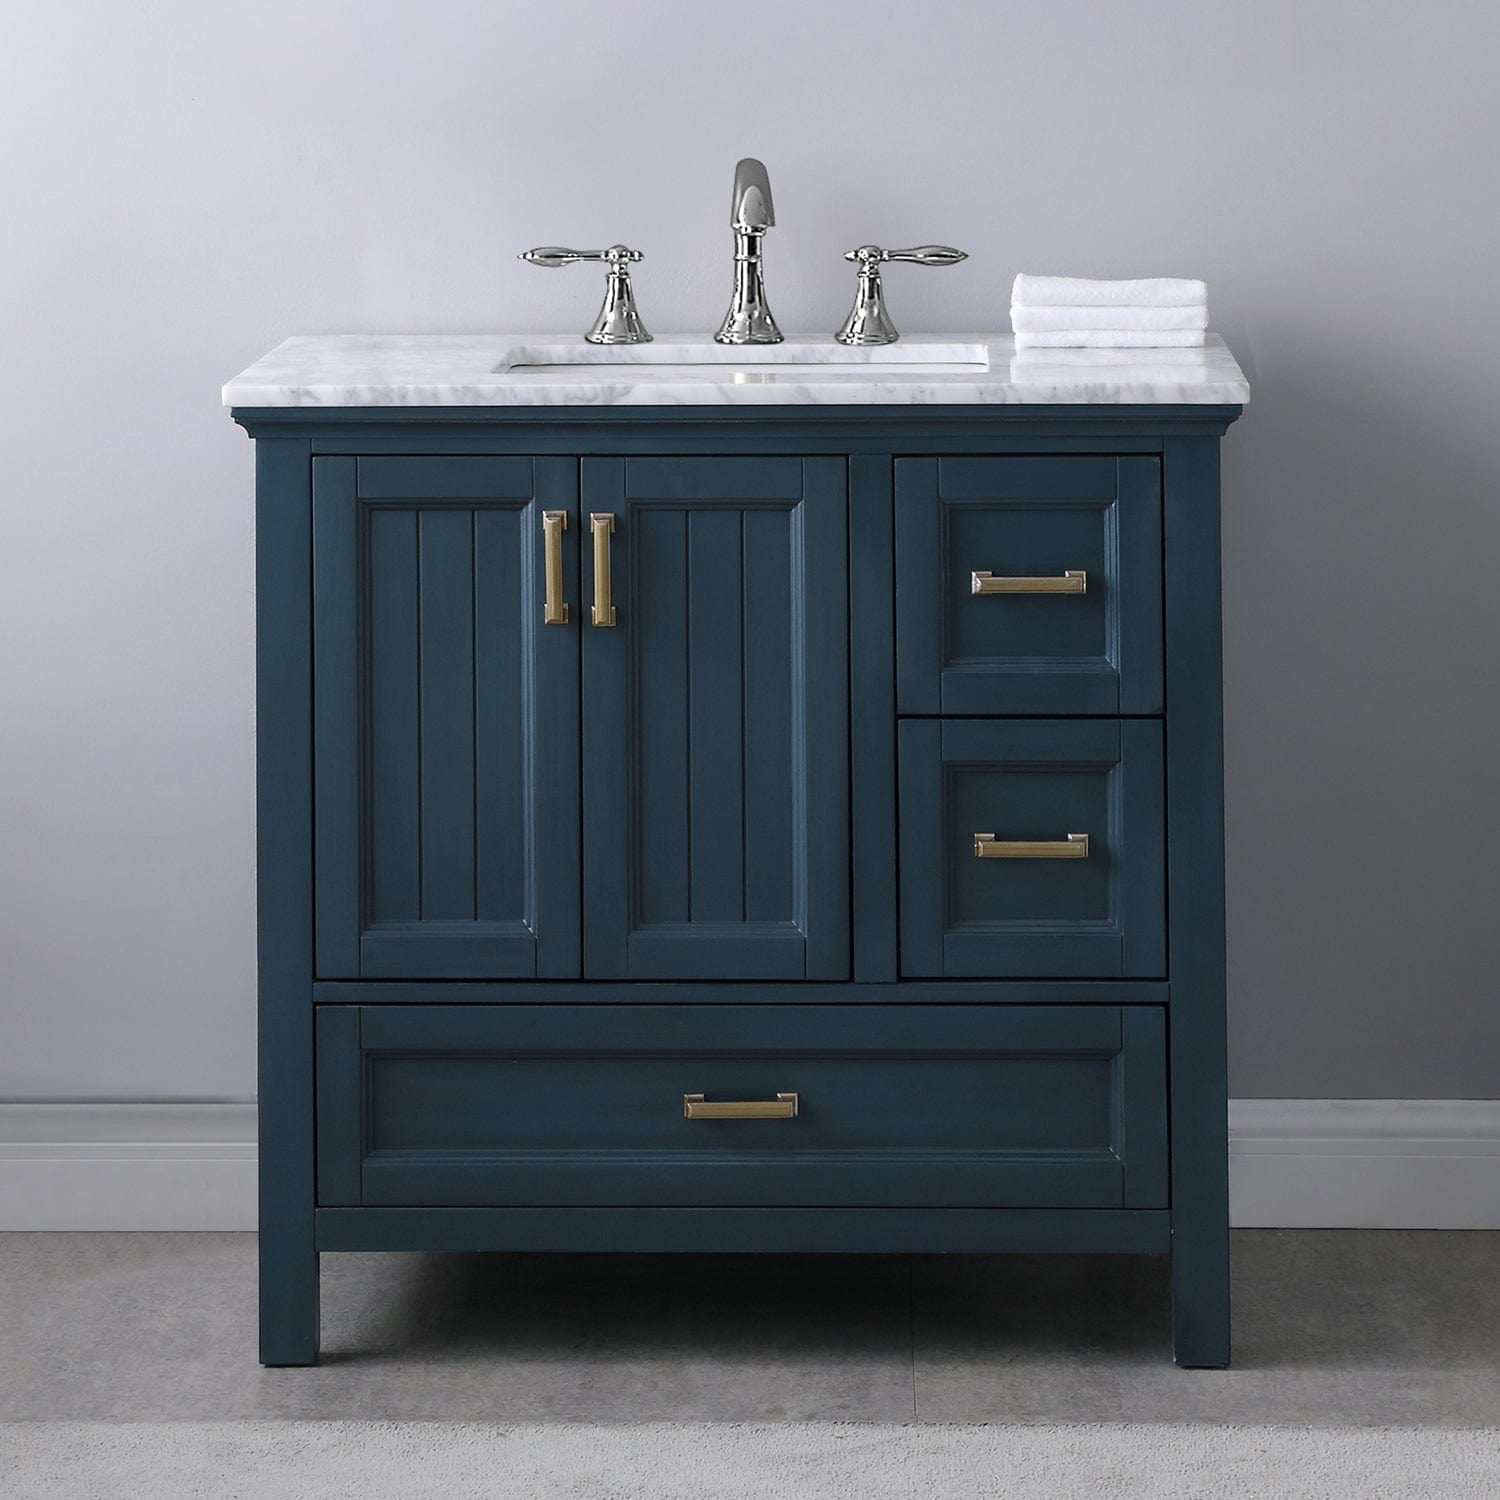 Altair Isla 36" Single Bathroom Vanity Set in Classic Blue and Carrara White Marble Countertop without Mirror 538036-CB-CA-NM - Molaix631112970808Vanity538036-CB-CA-NM